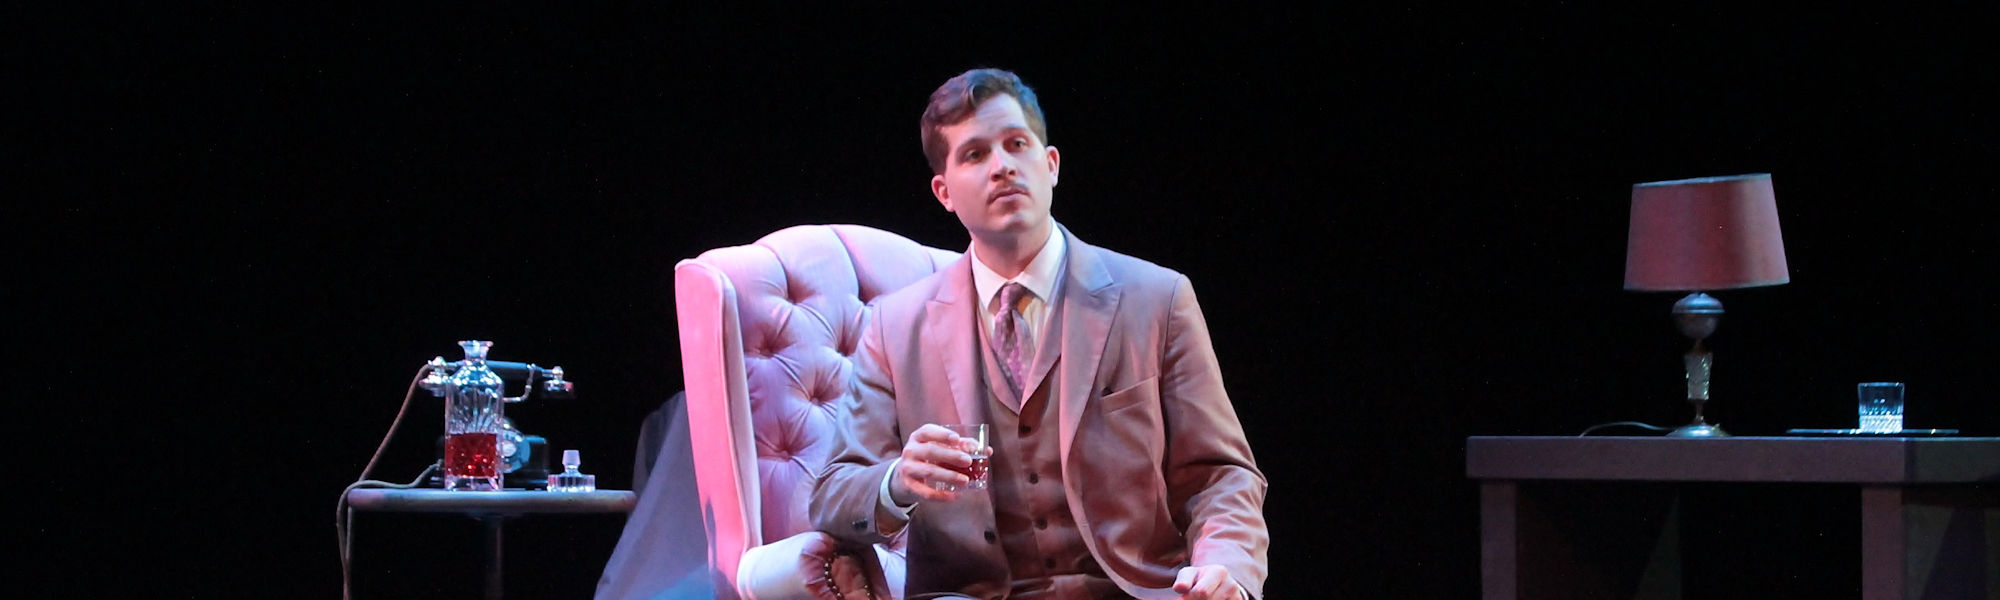 From RLT's production of The 39 Steps, performed October 2012